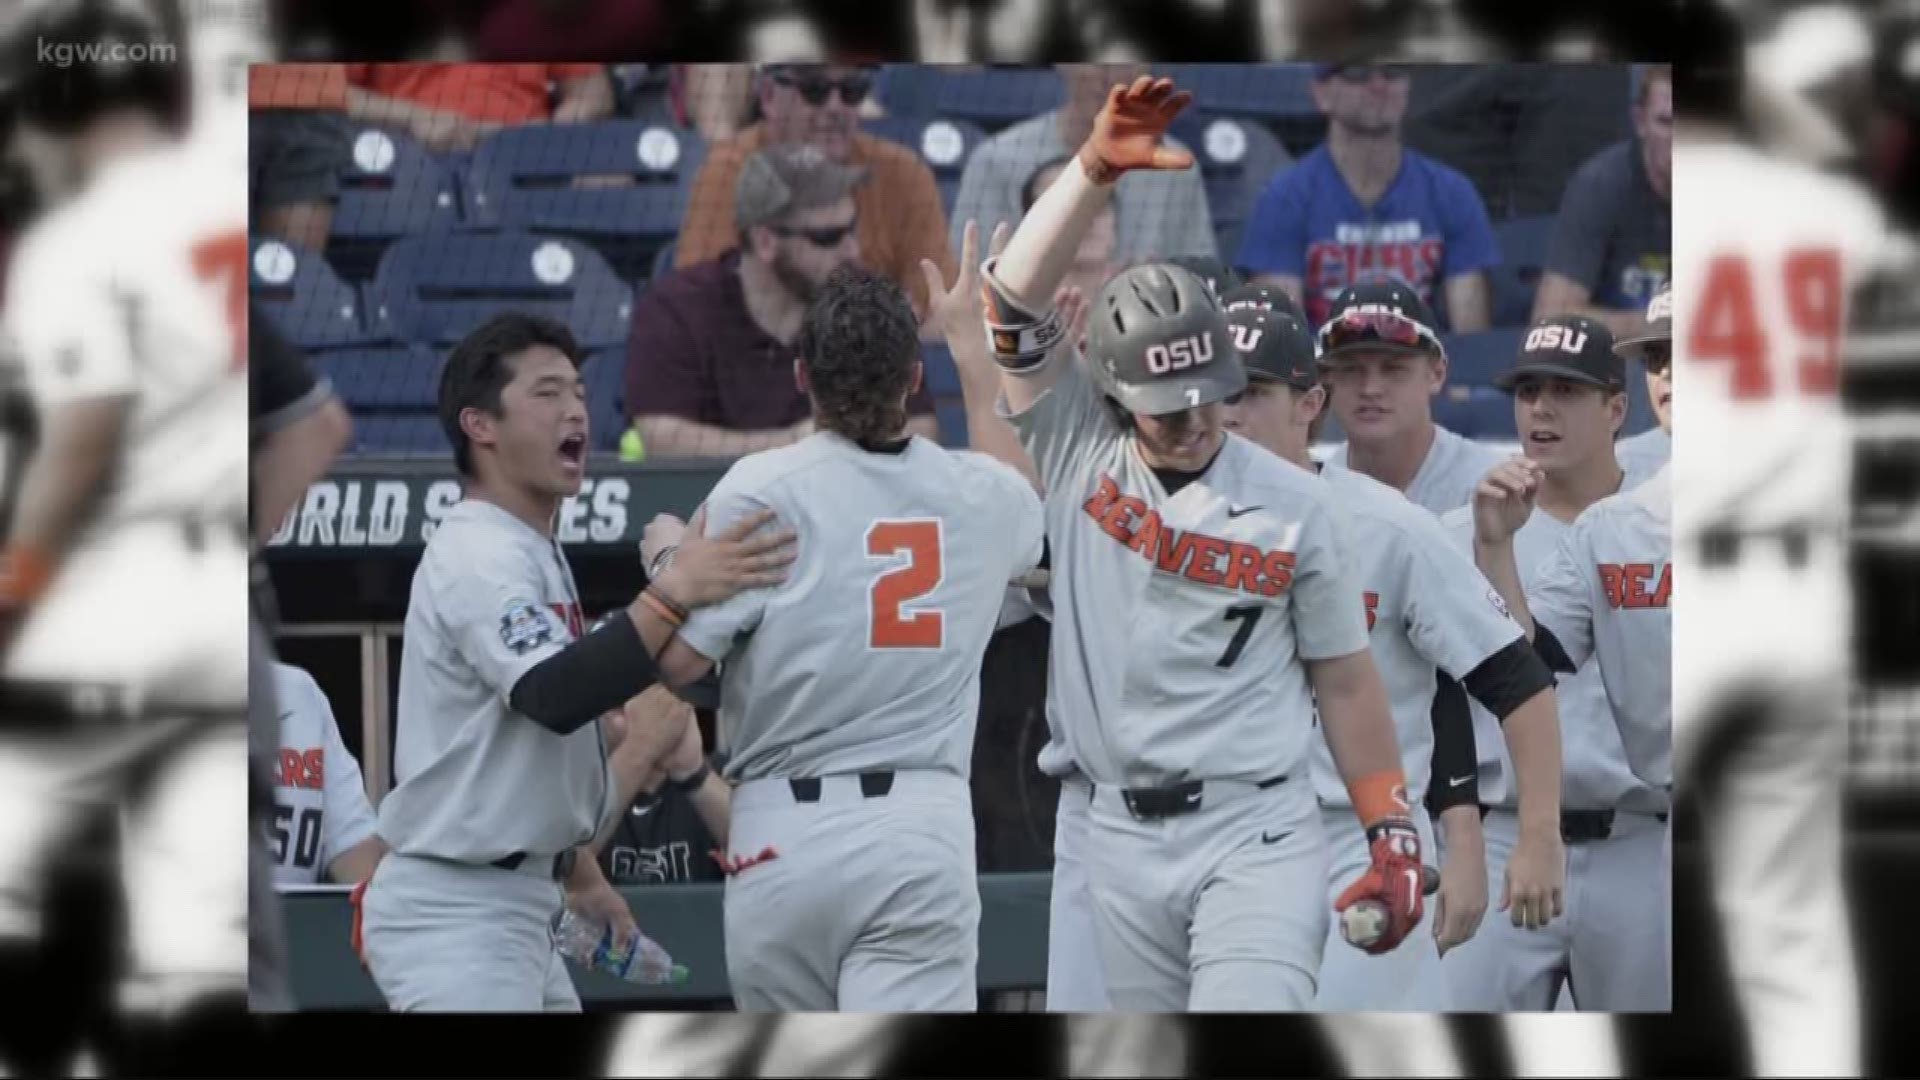 It's winner-take-all for the Beavers at the CWS.